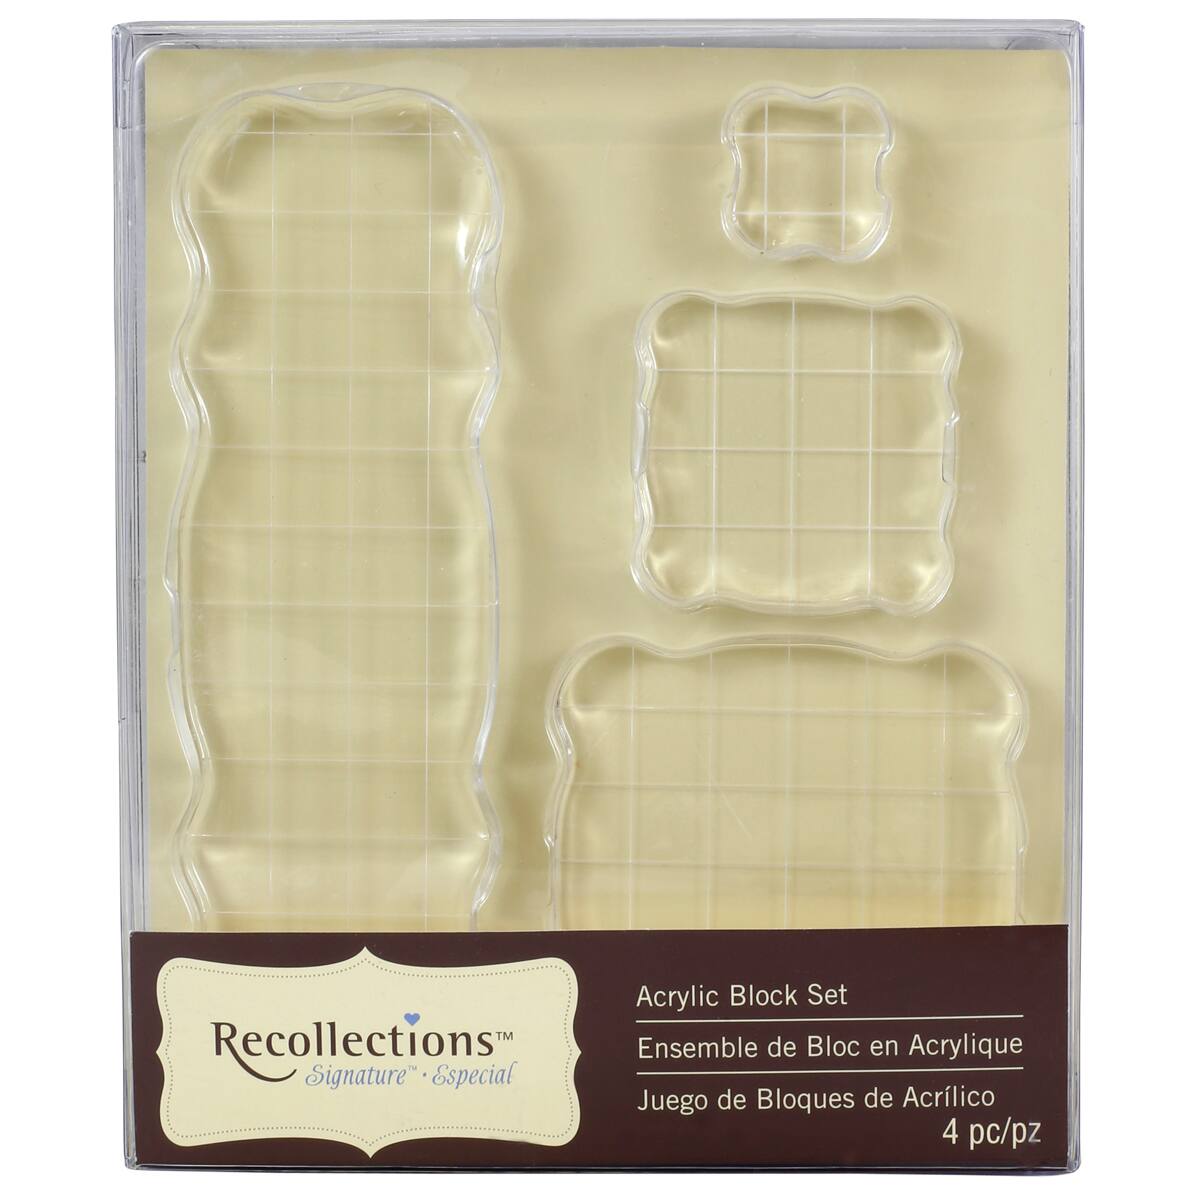 Recollections™ Stamp Cleaner